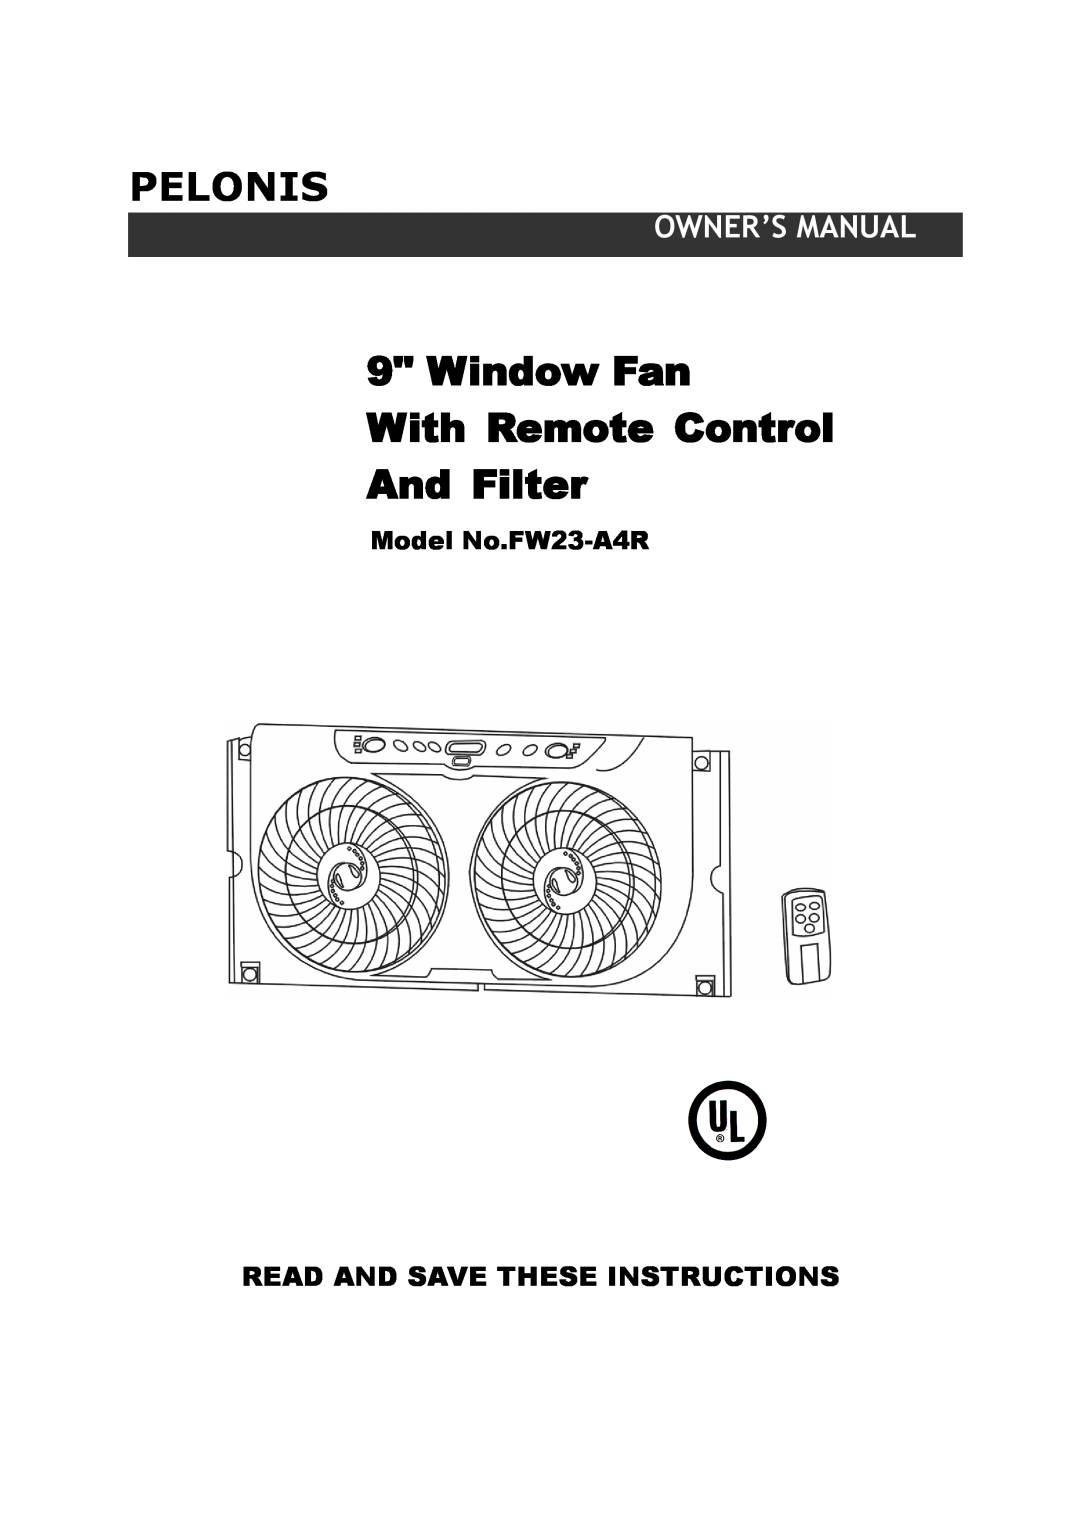 Pelonis owner manual Model No.FW23-A4R, Pelonis, Window Fan With Remote Control And Filter 